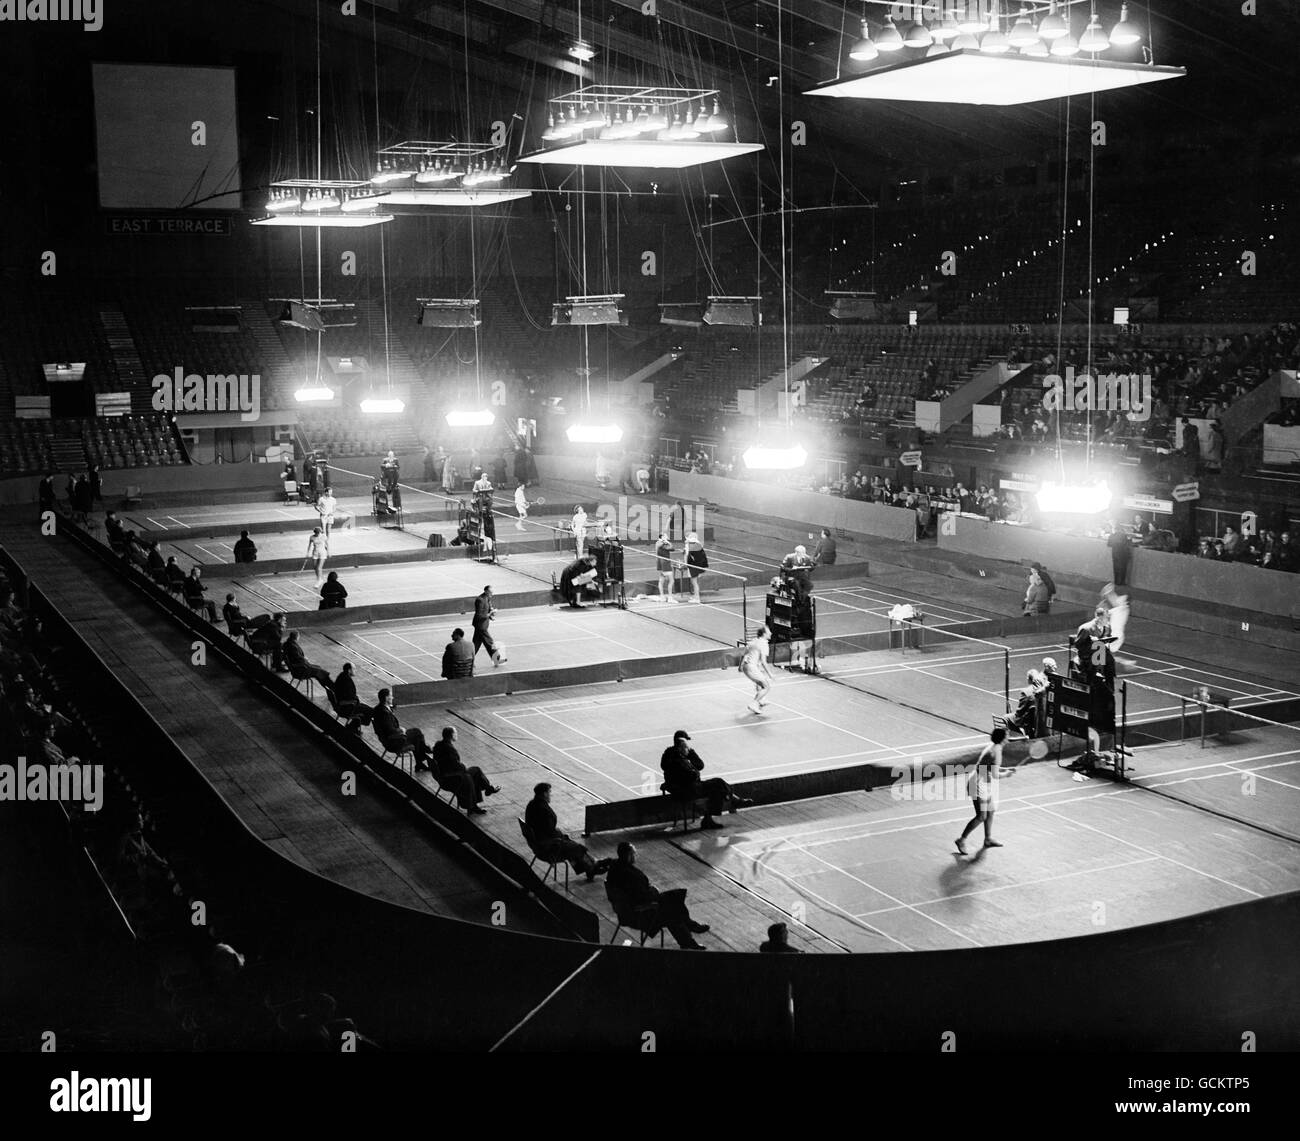 A general view of the championship in progress at the Empire Pool, Wembley, London. Stock Photo